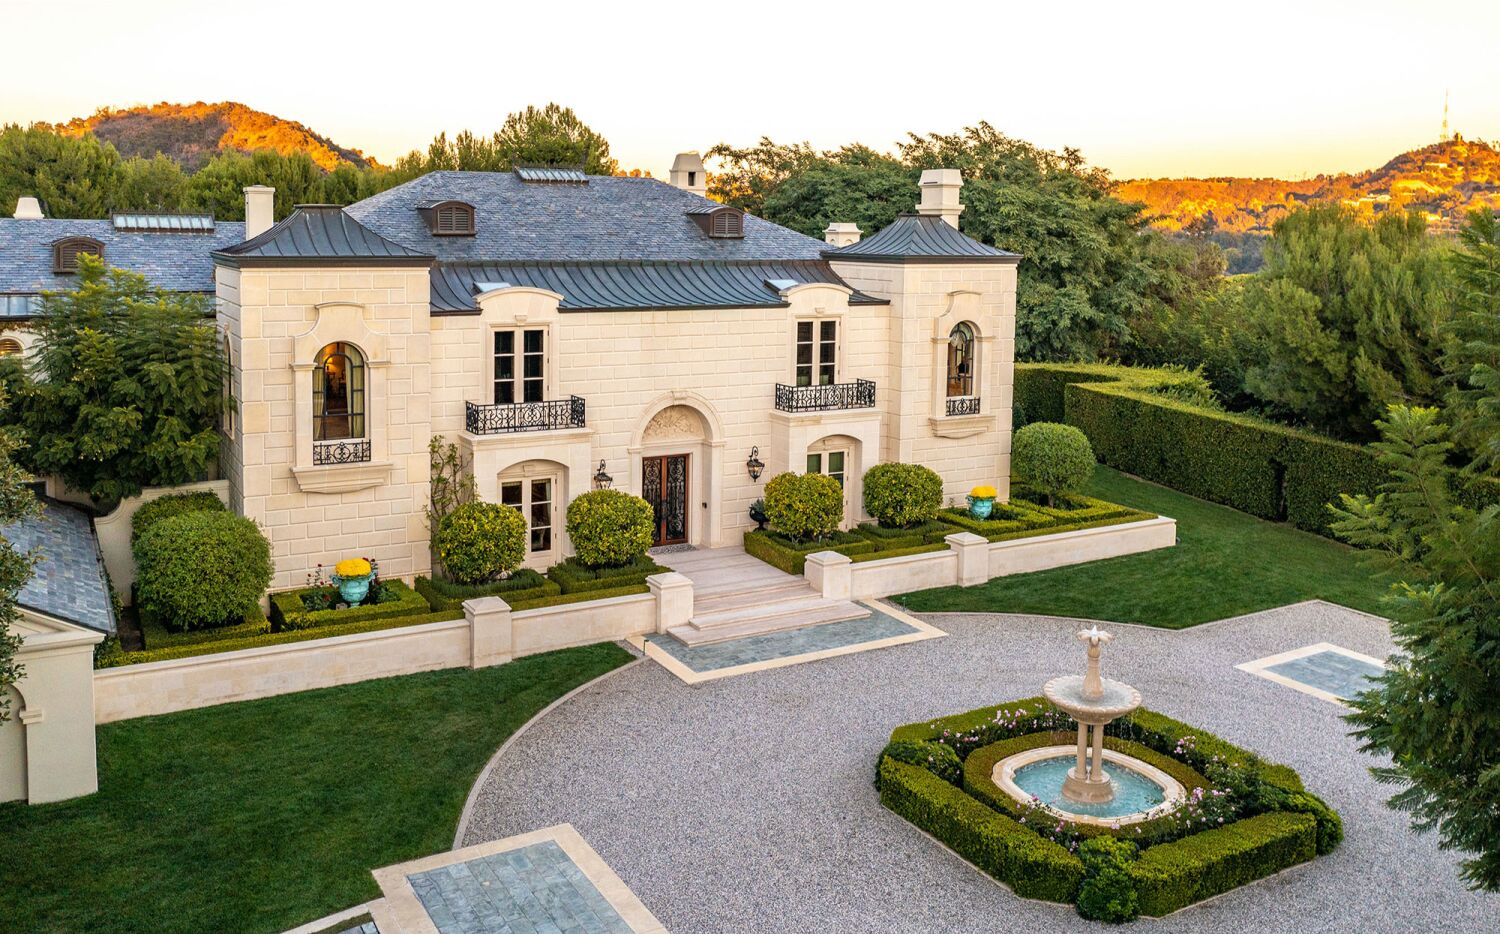 California Pizza Kitchen founder lists Beverly Park estate